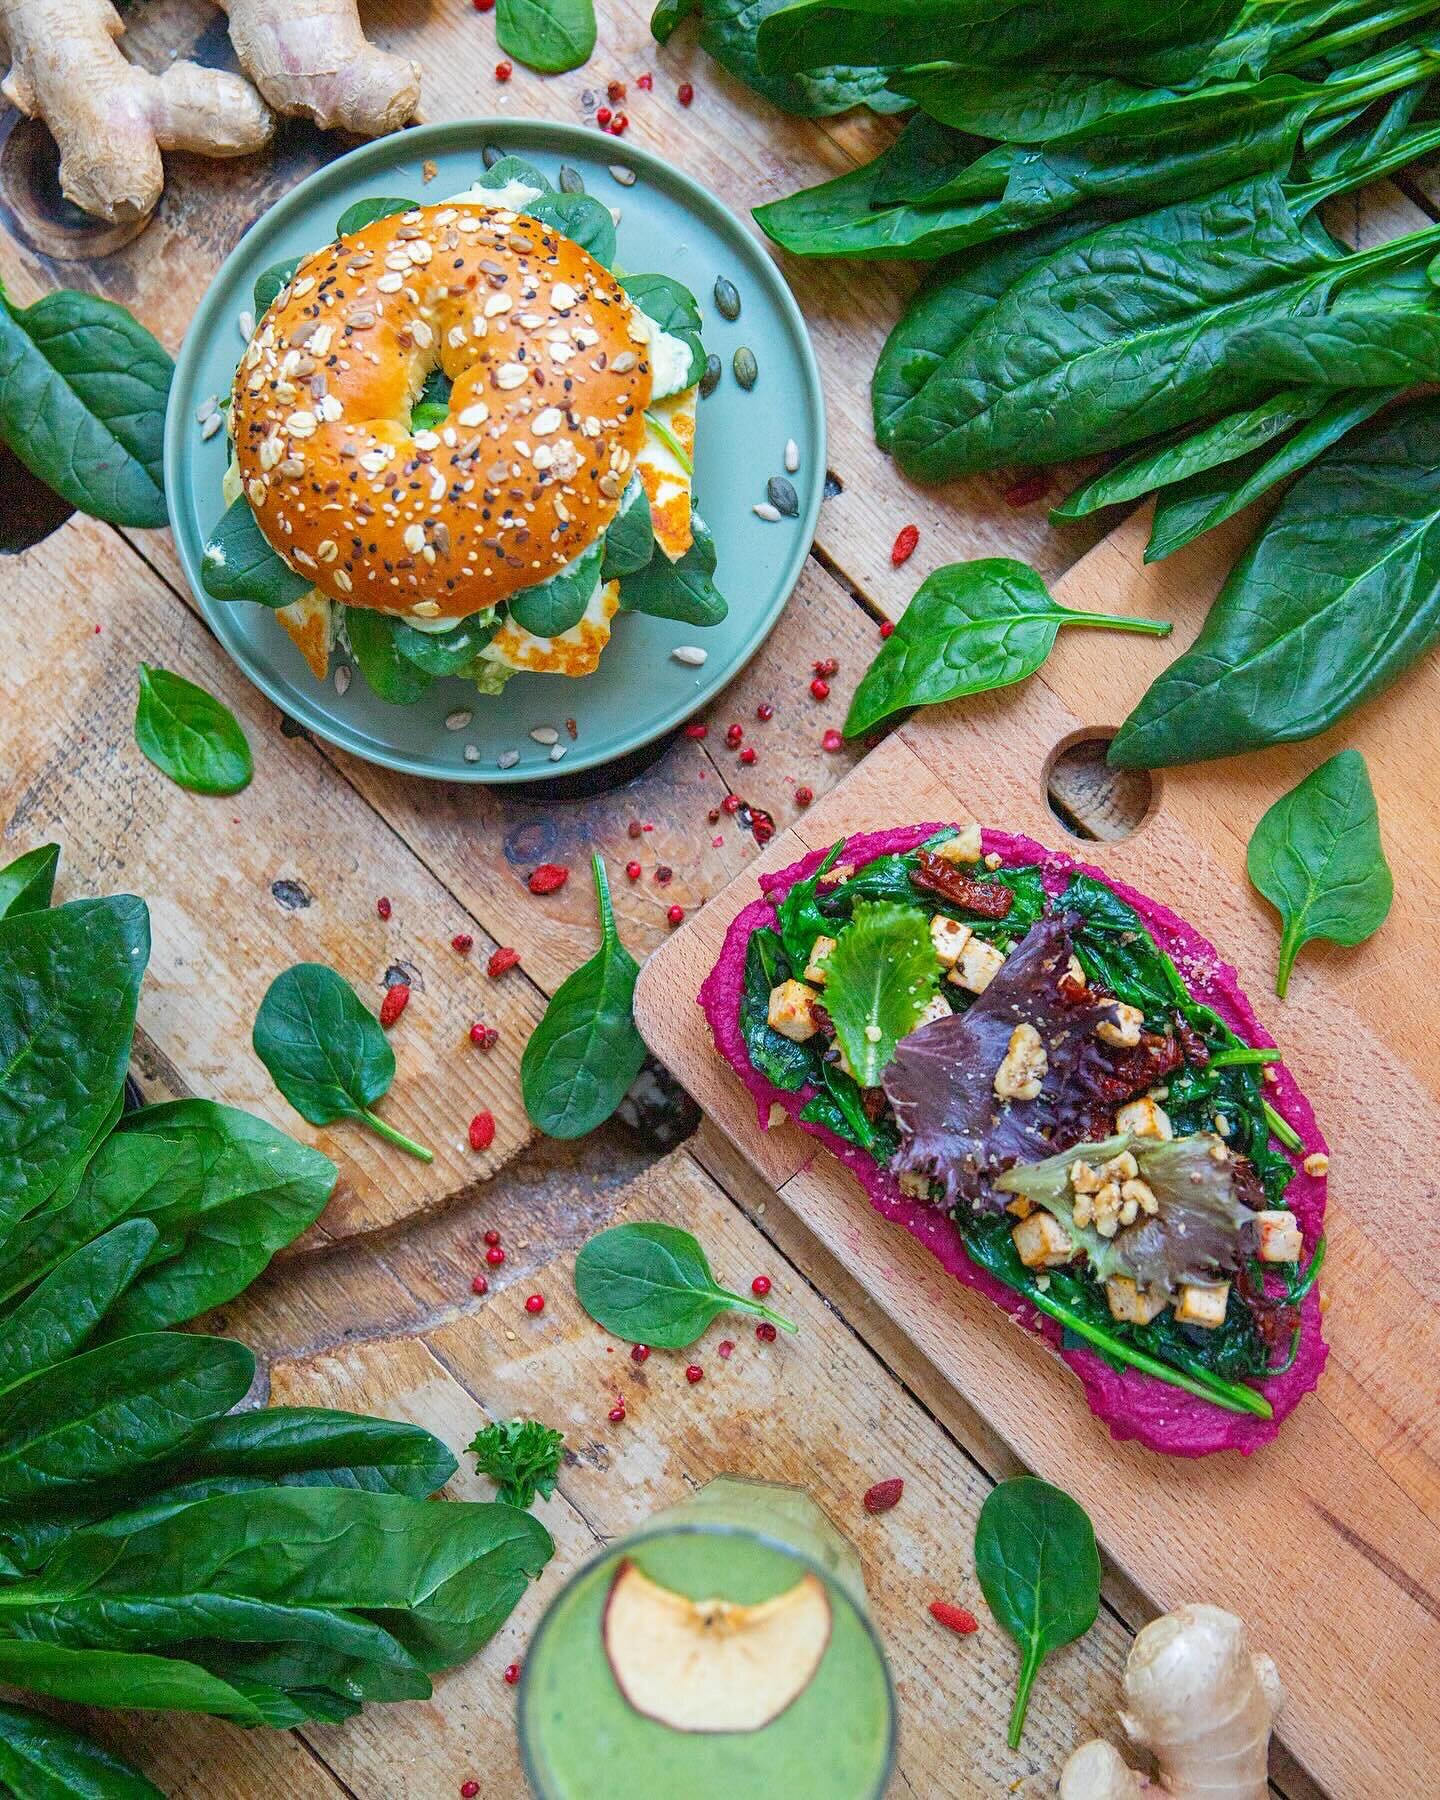 Legume do m&ecirc;s: Espinafre! 🍃
Podes encontr&aacute;-lo em v&aacute;rios pratos como no Bagel Halloumi, Sumo Green Flora e na Tosta Forest! 

Veggie of the month: Spinach! 🍃
You can find it in Bagel Halloumi, Green Flora juice and in Forest Toas